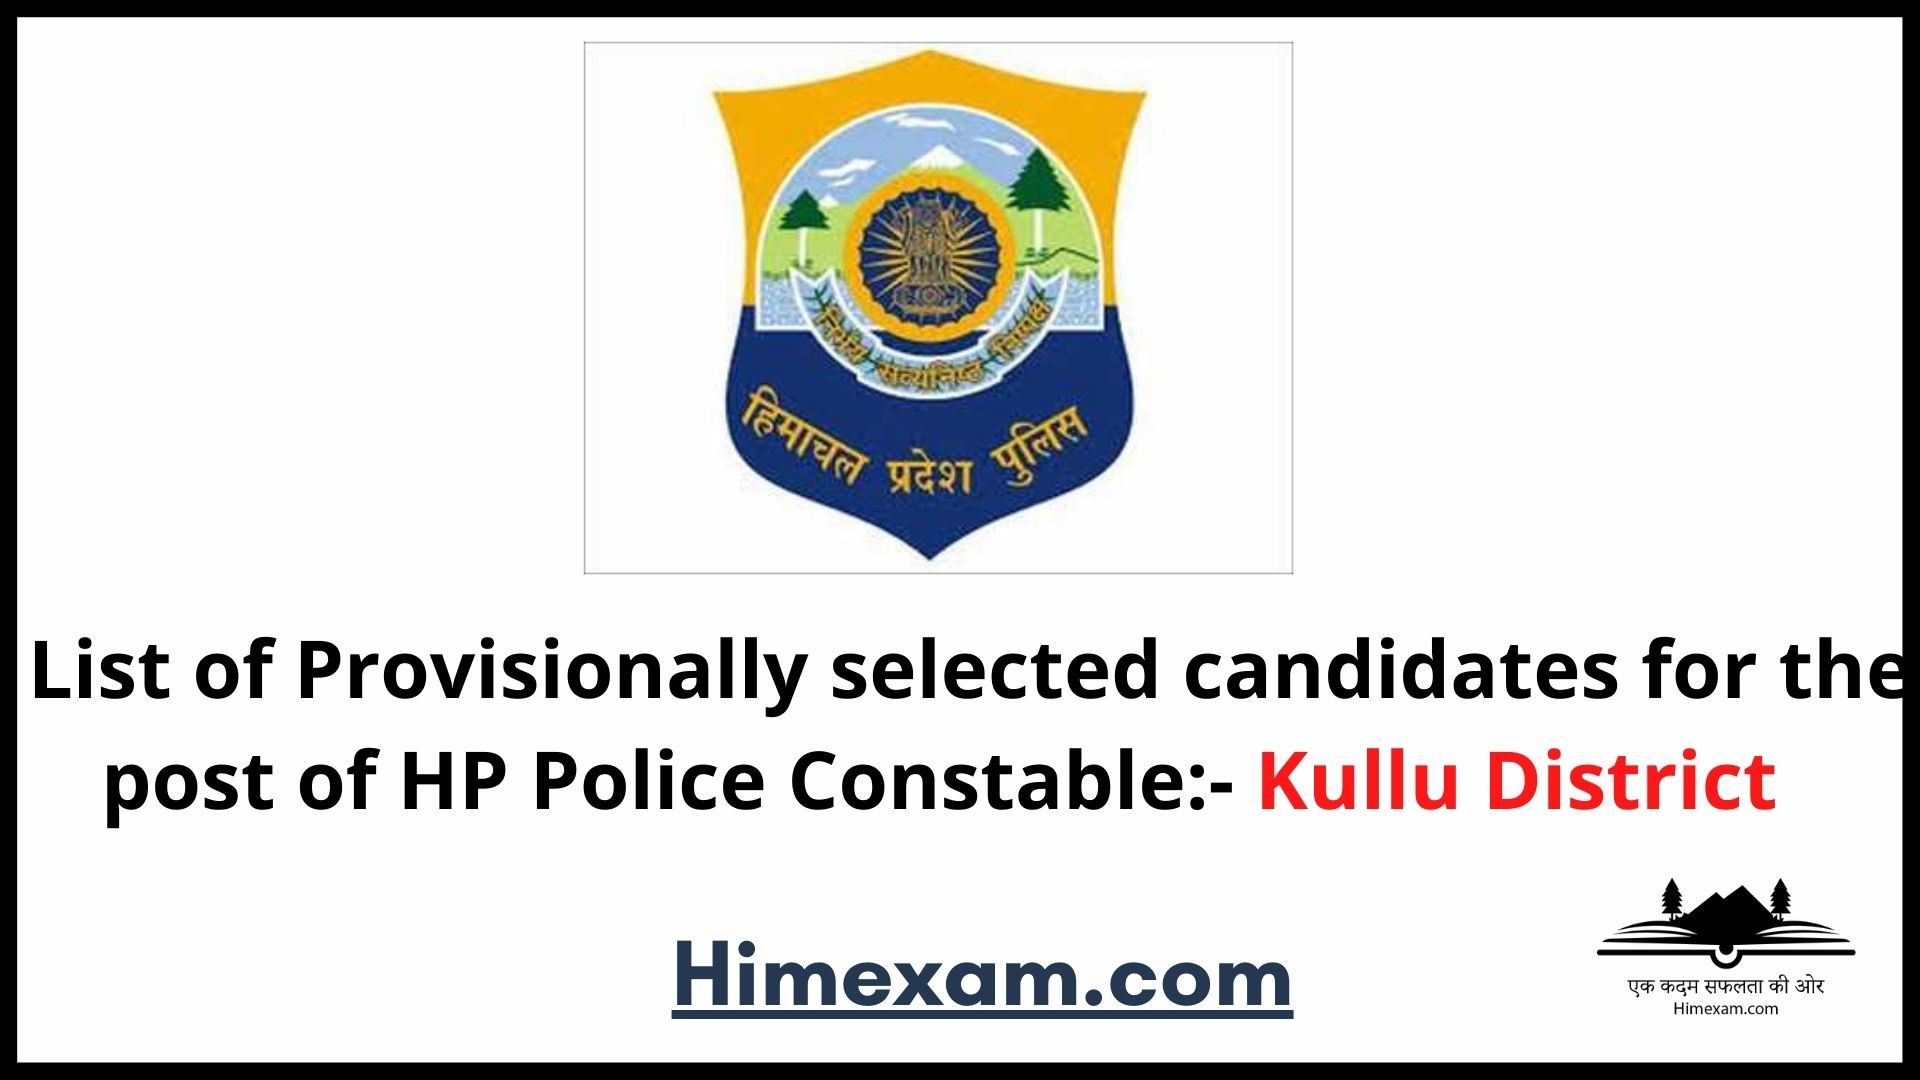 List of Provisionally selected candidates for the post of HP Police Constable:- Kullu District